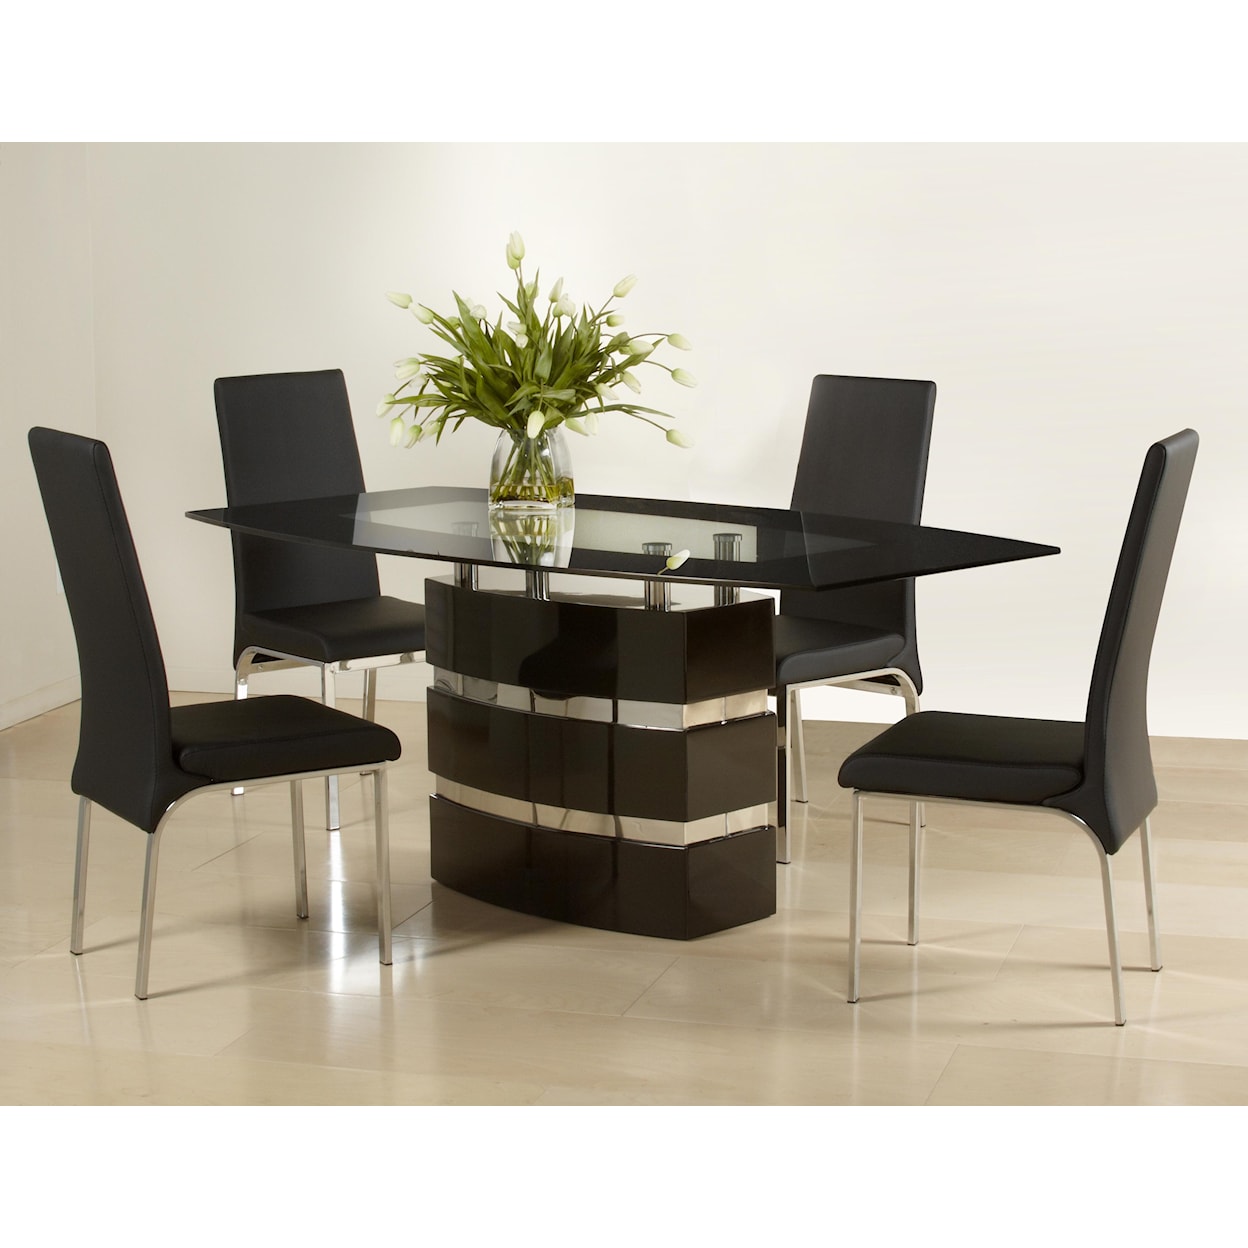 Chintaly Imports Xenia Boat Shape Dining Table